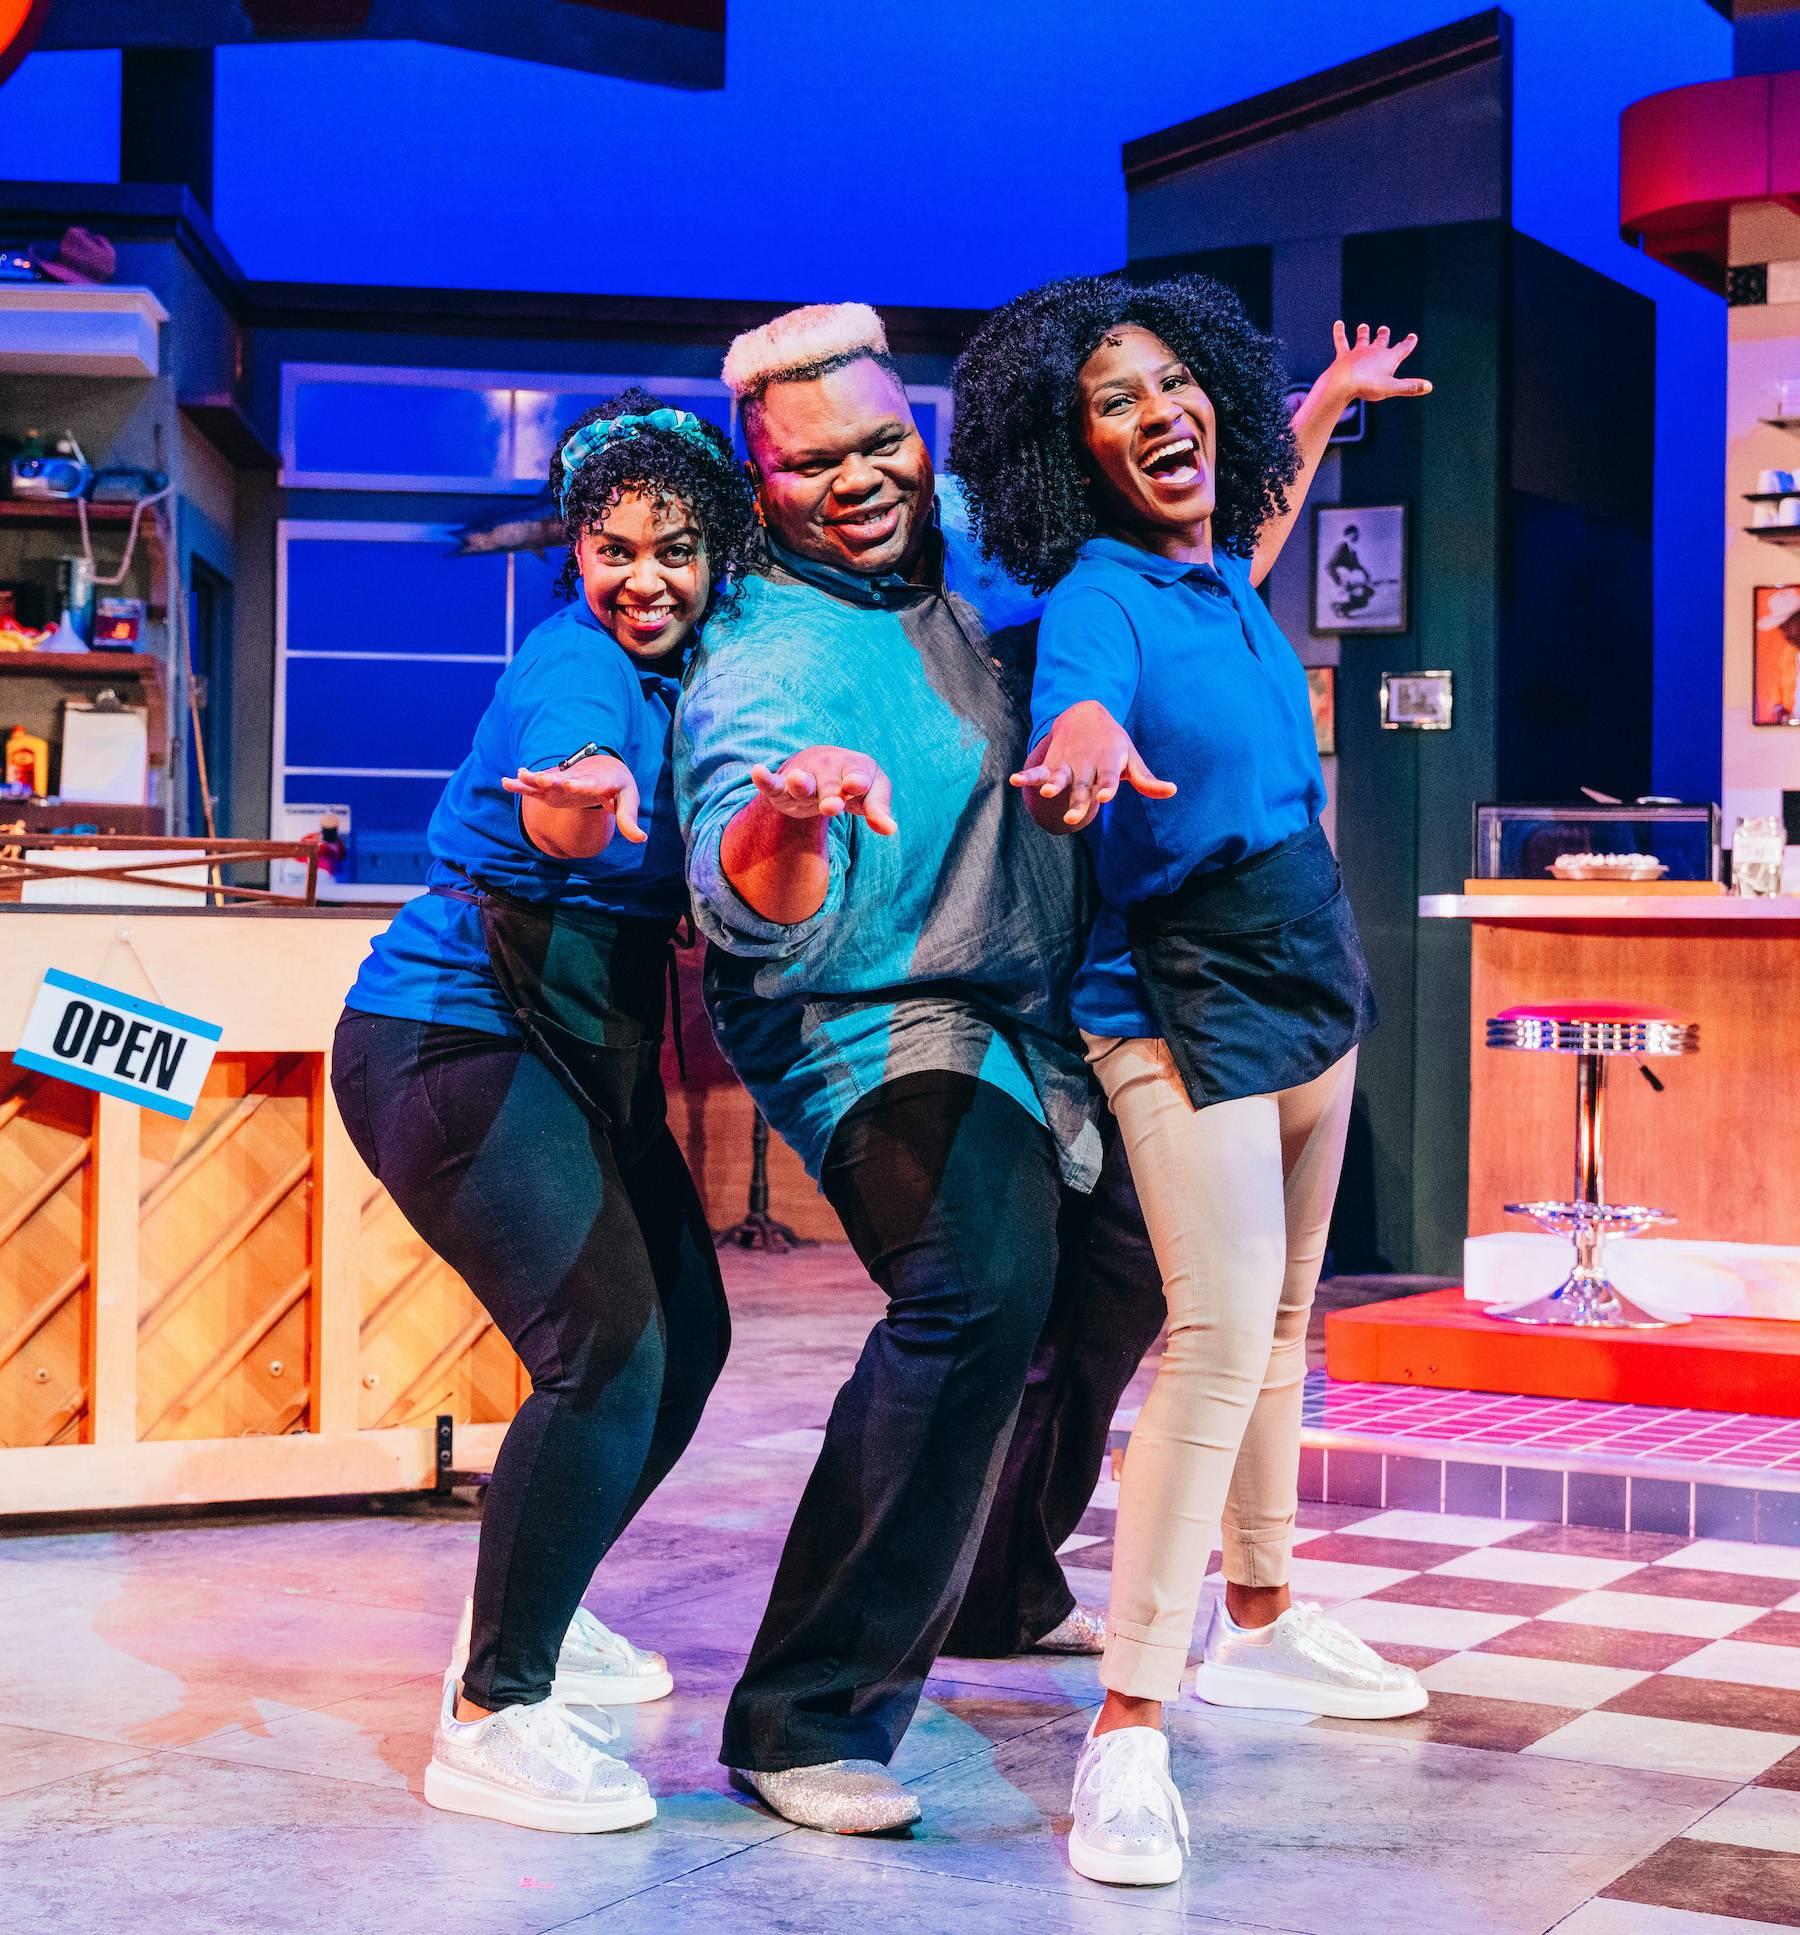 Melanie Loren (left to right), Frederick Harris and Shantel Cribbs in “Pump Boys & Dinettes” from Porchlight Music Theatre, now playing through Dec. 12. (Photo by Chollette)